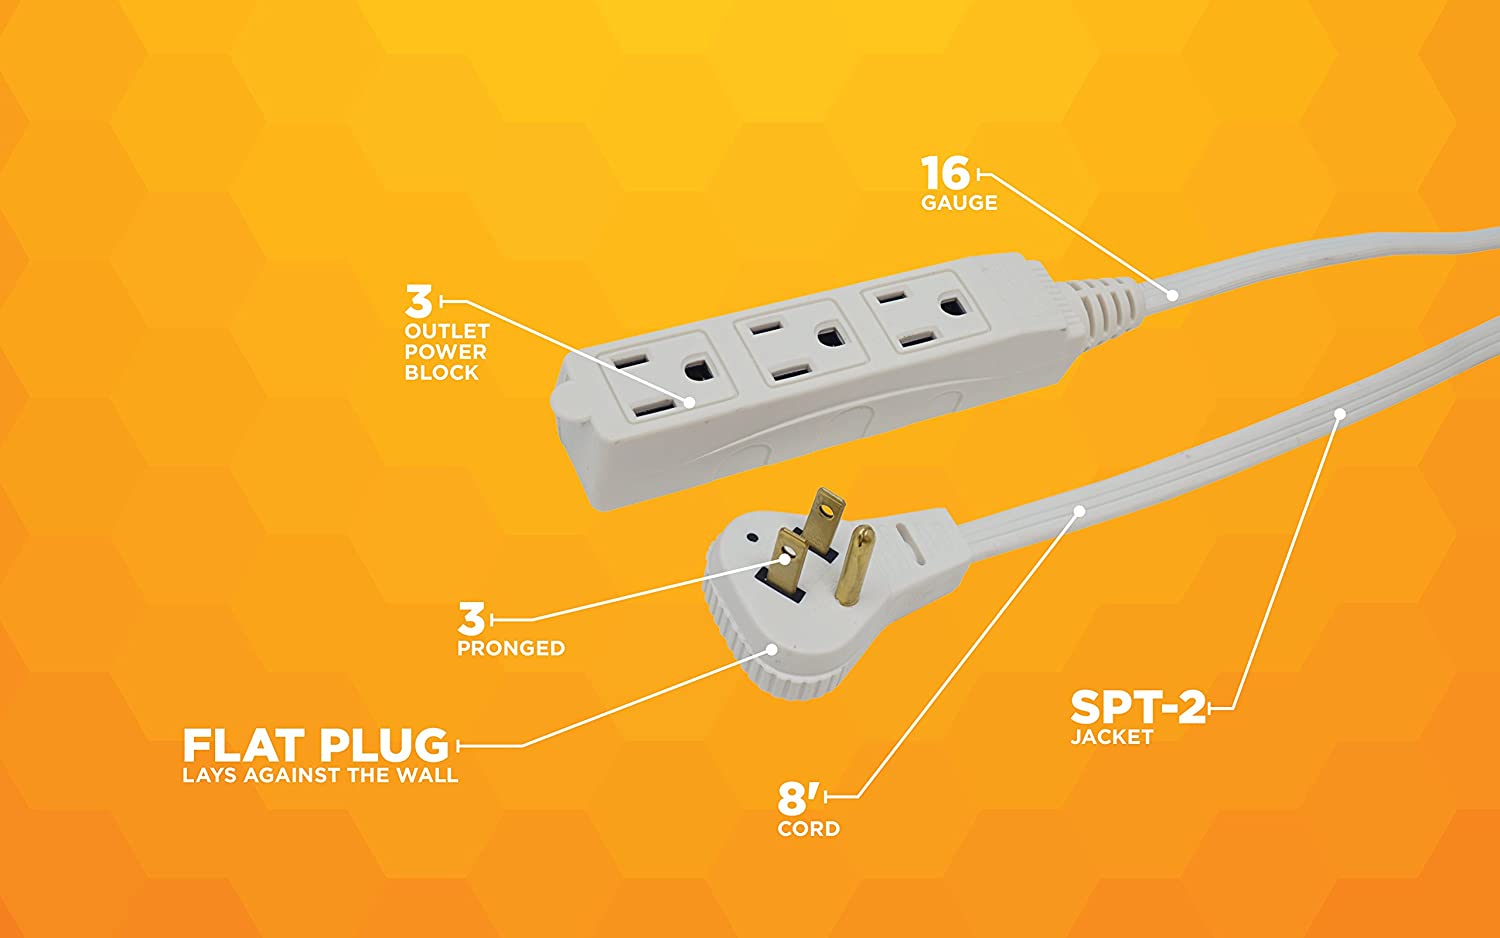 SlimLine 2241 16/3 Flat Plug Indoor Extension Cord, 8-Foot, 3 Outlets, Right Angled Plug, Space Saving Design, UL Listed